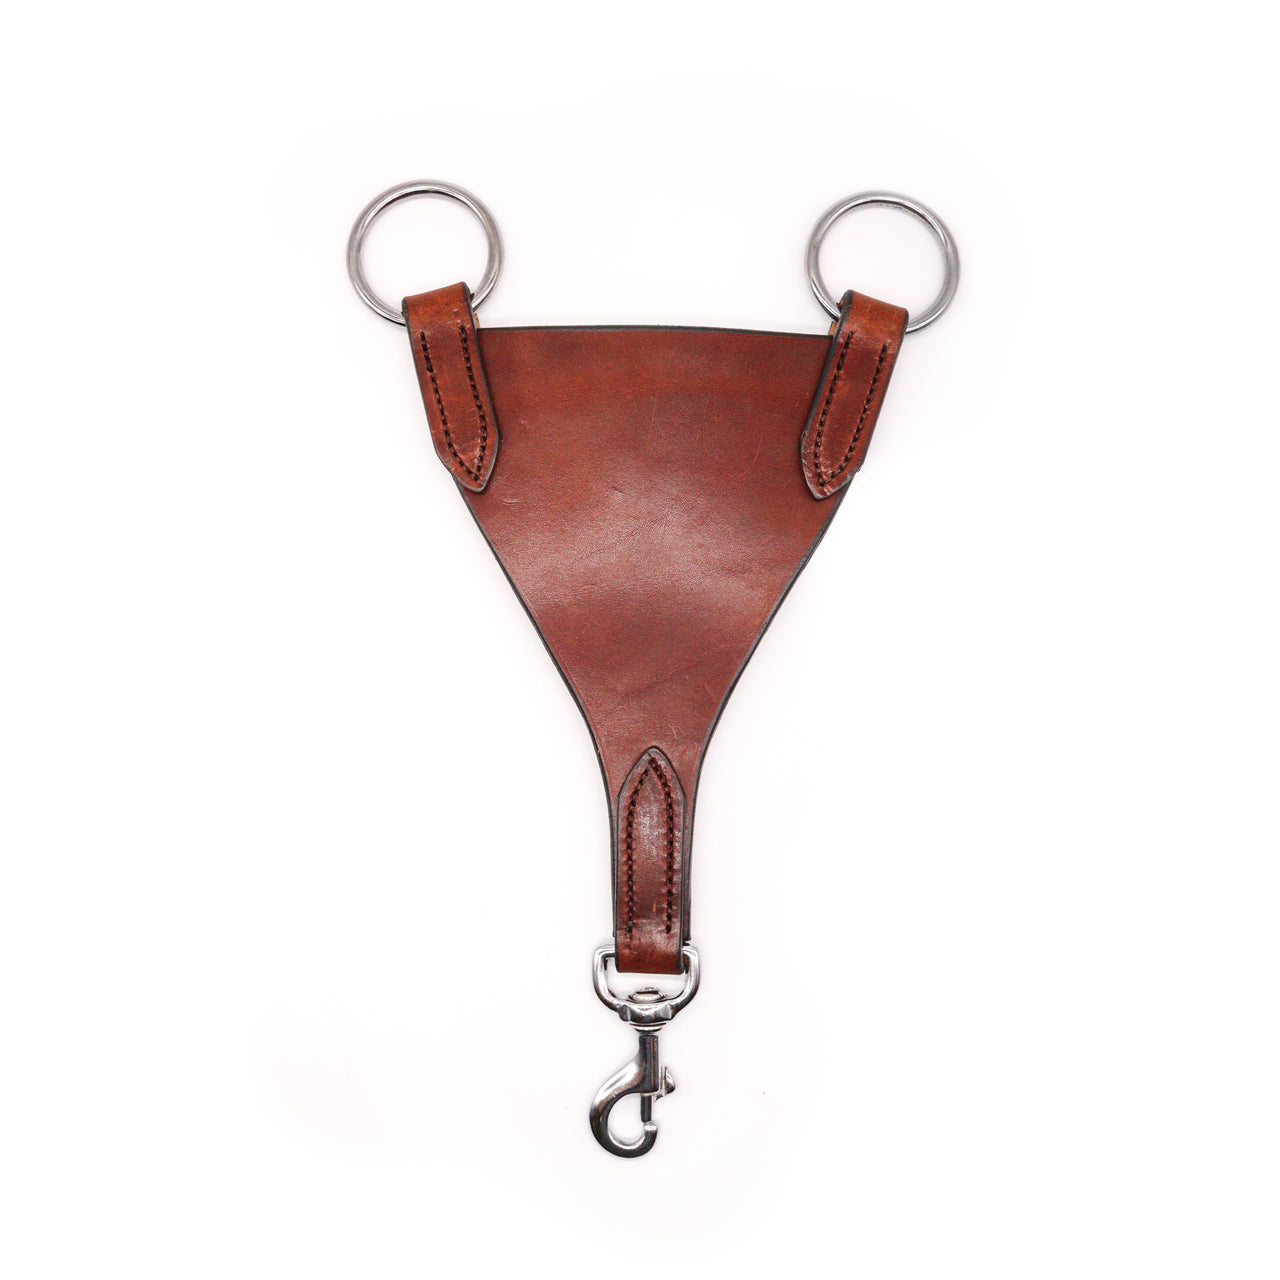 Ring Fork - Brown with Silver Hardware